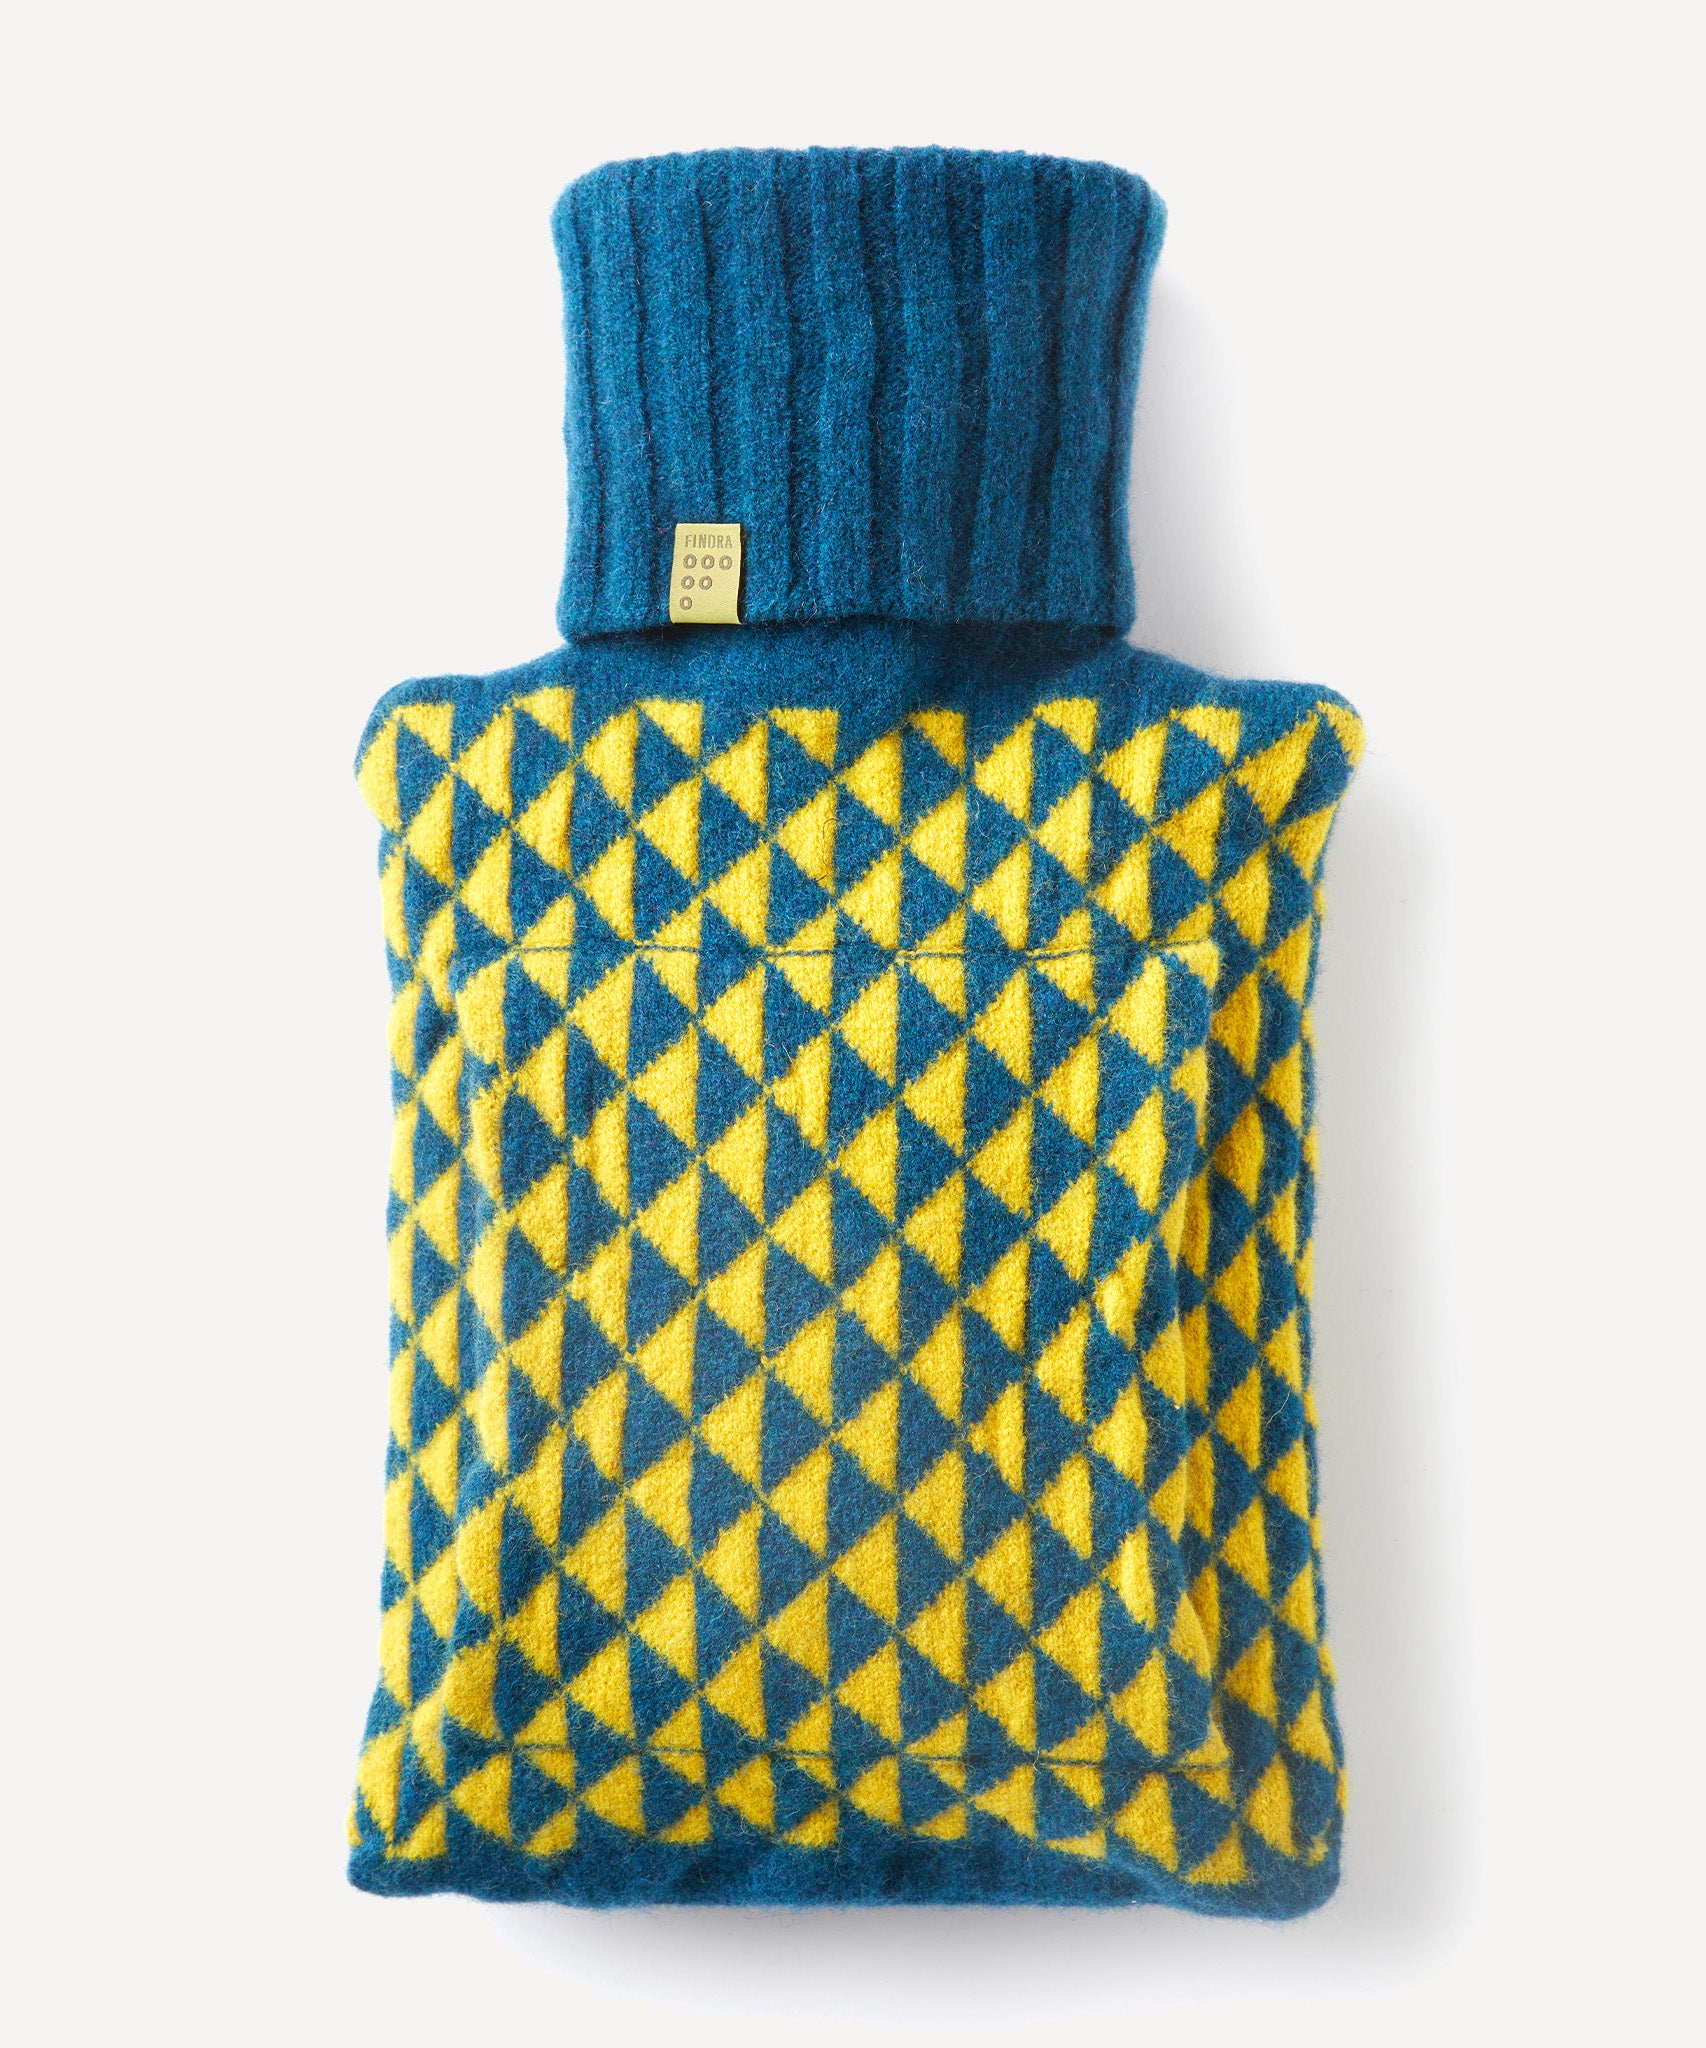 FINDRA Coorie Hot Water Bottle Cover Picalilli/Peacock